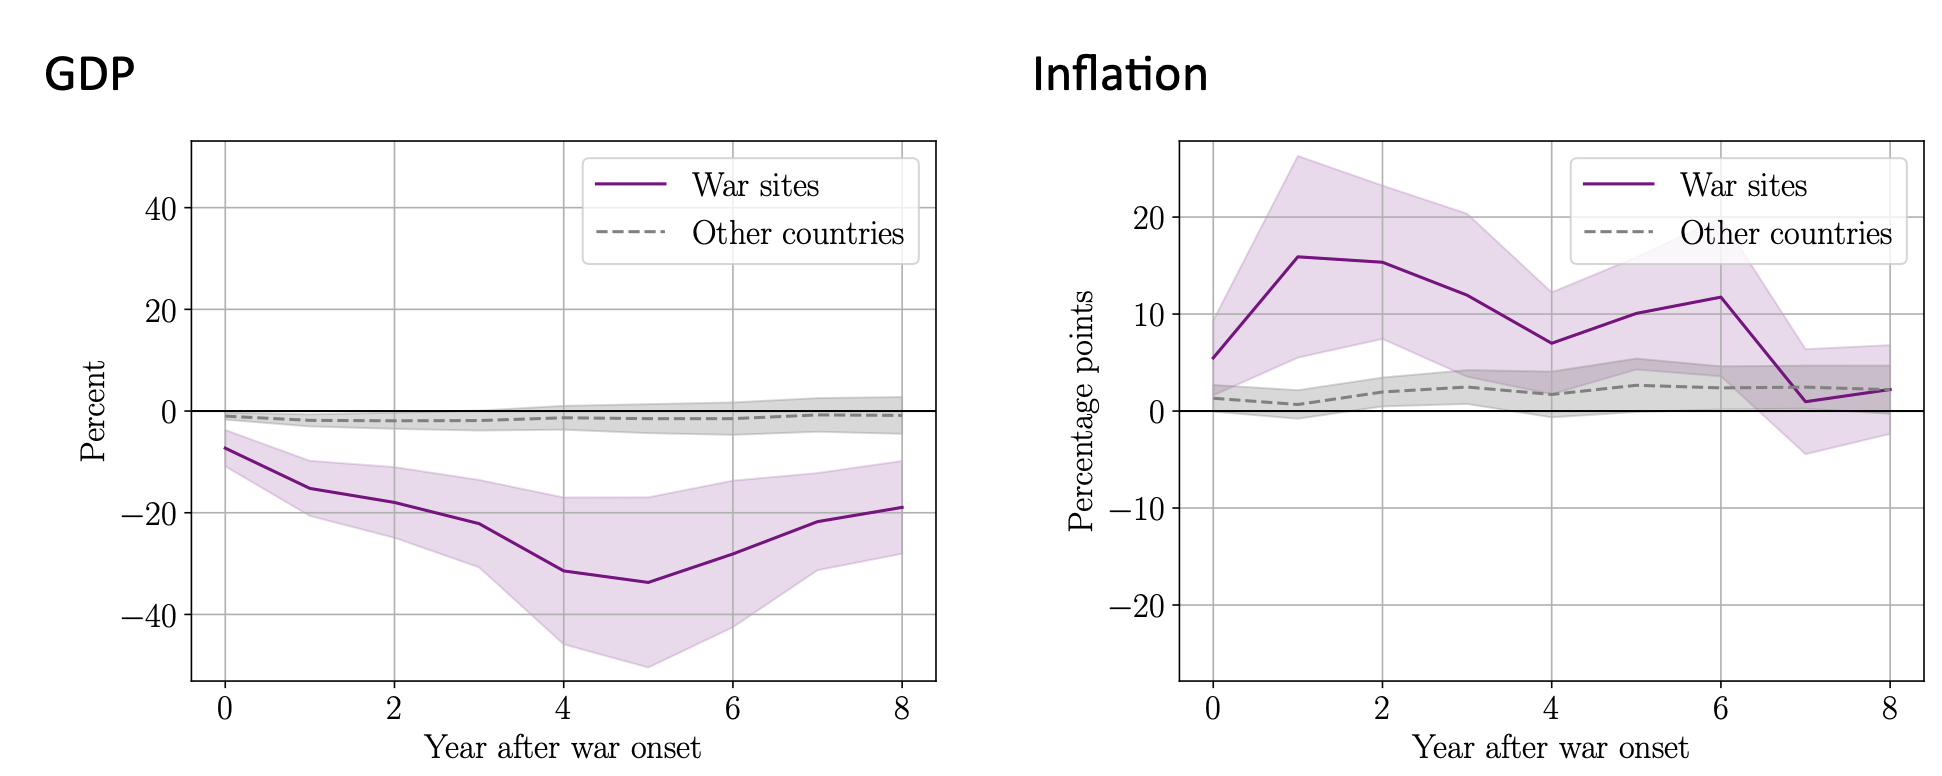 Figure 1 The economic repercussions in war sites and other countries